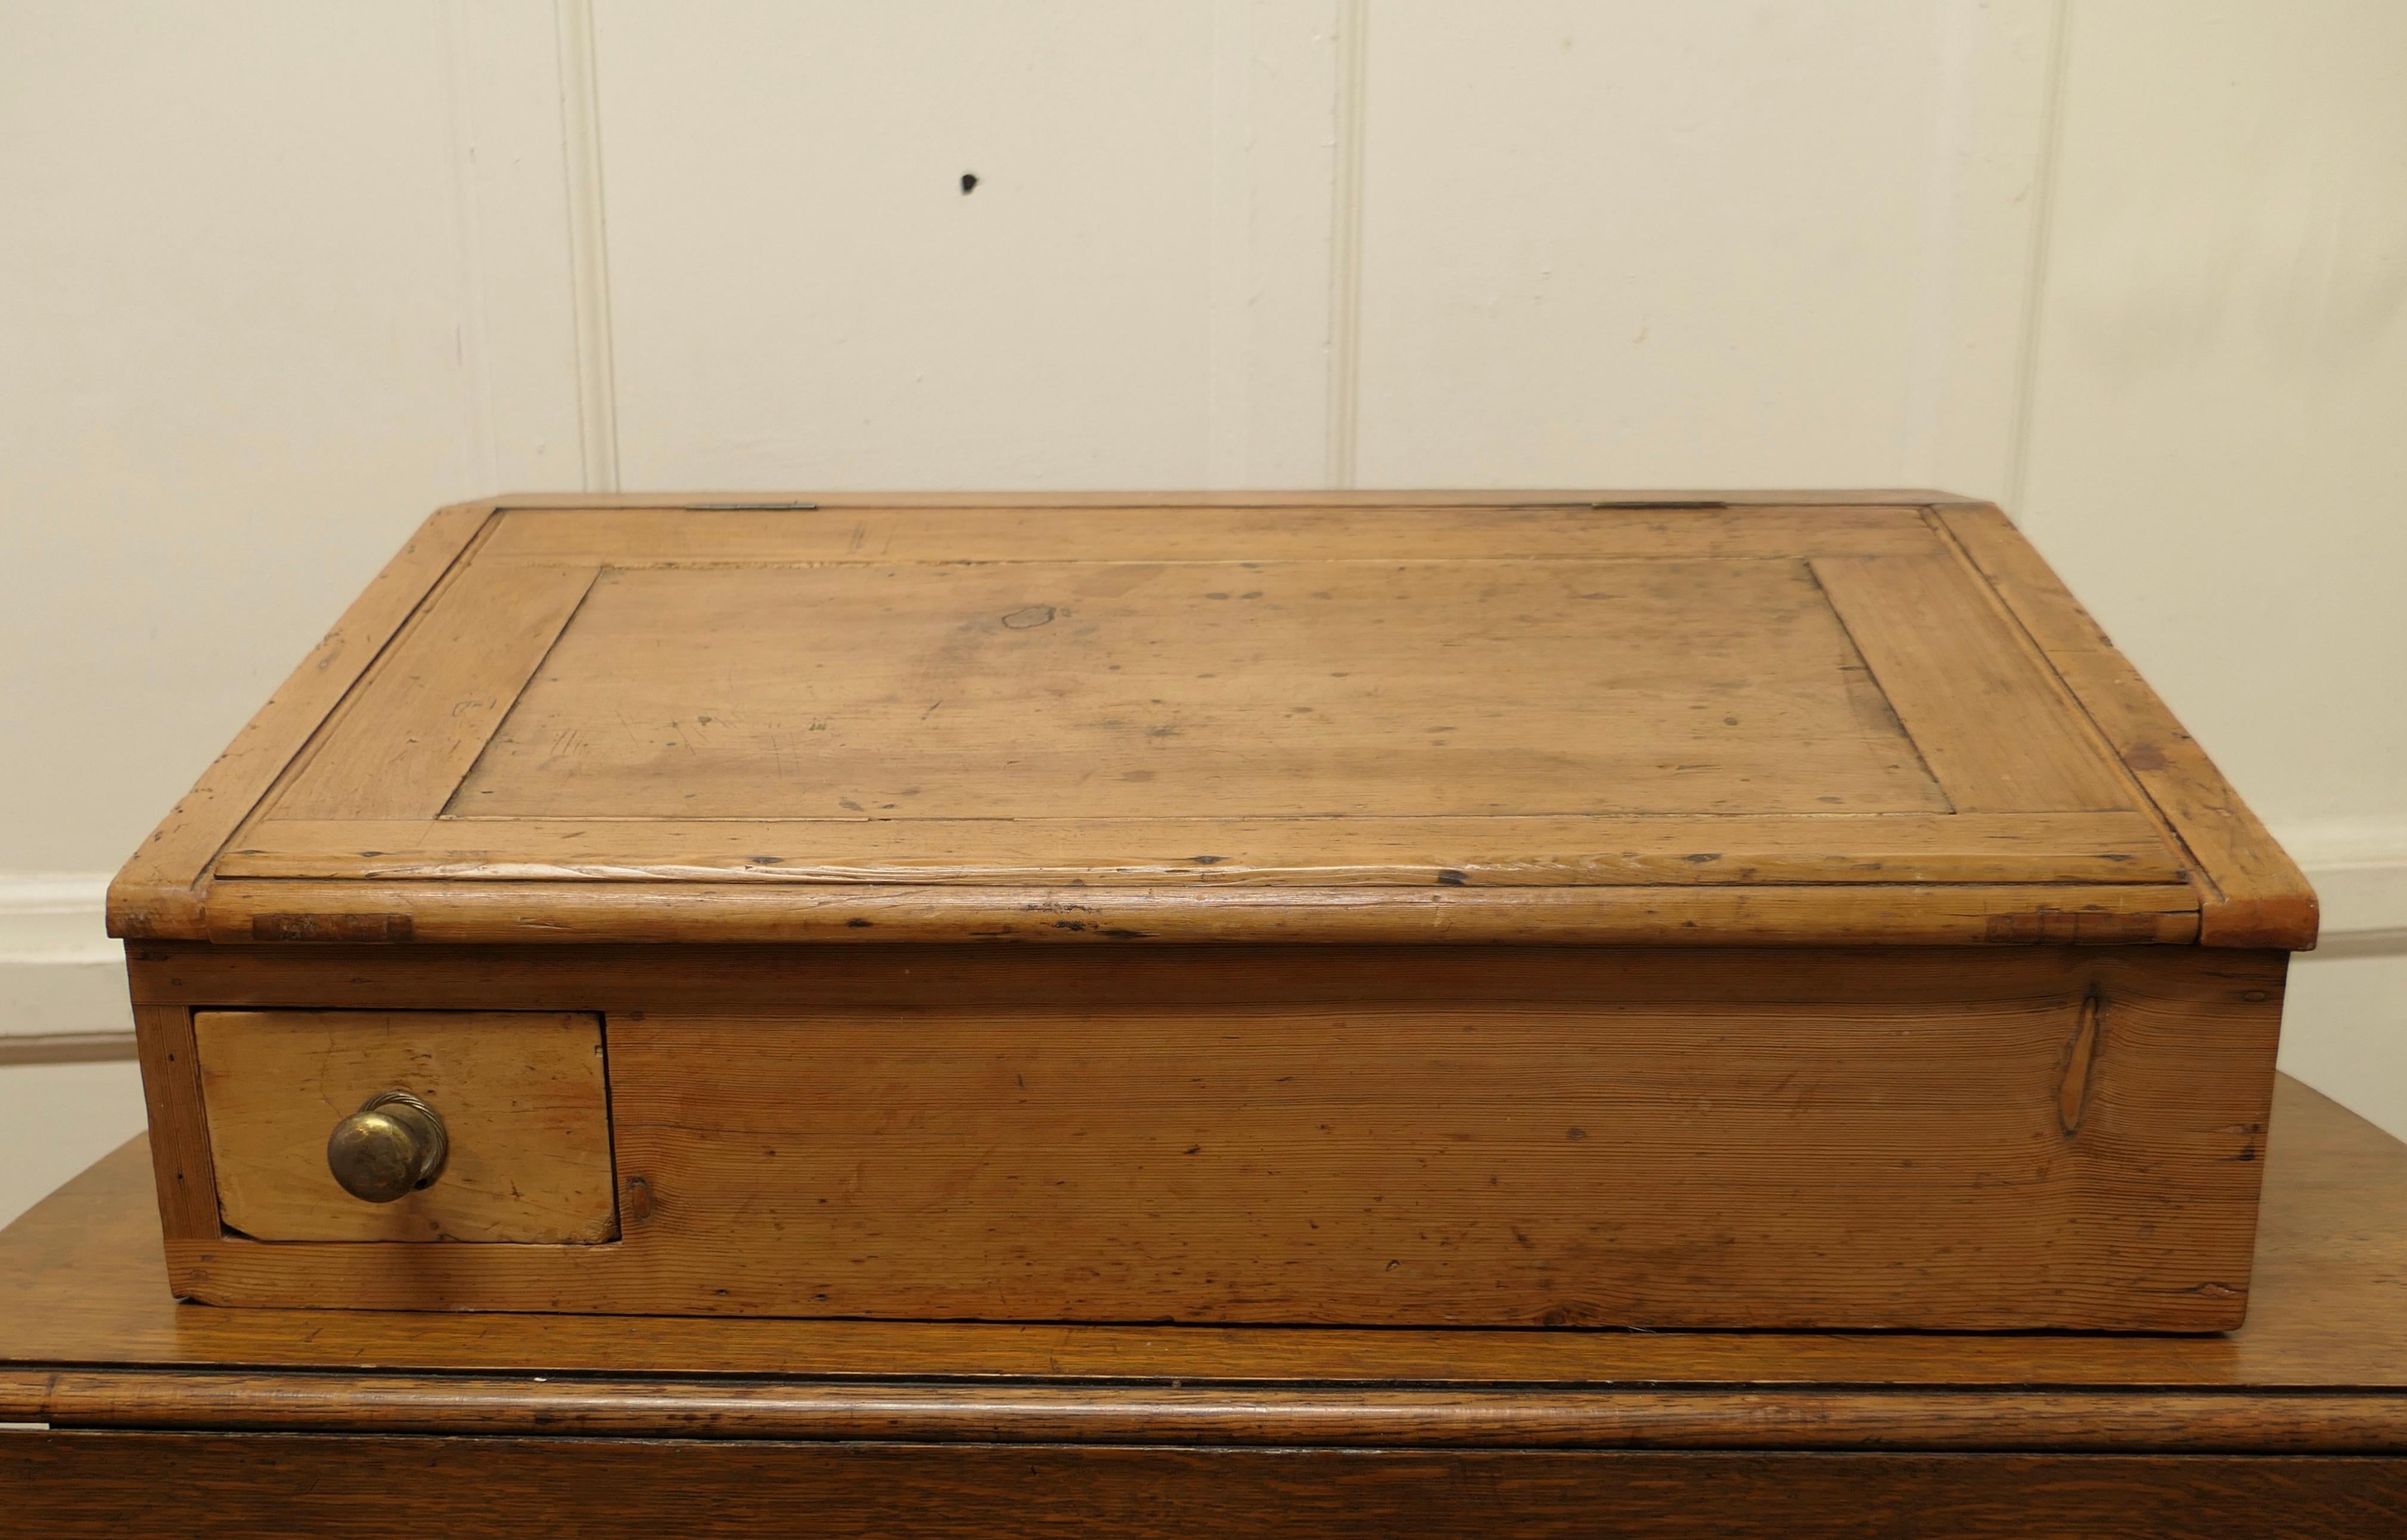 Antique Pine Sloping Clerks writingdesk, greeting station

A Lovely old piece, the desk is made in solid pine, it has a sloping lid which encloses a storage compartment with a drawer that locks from the inside, best to point to that there has been